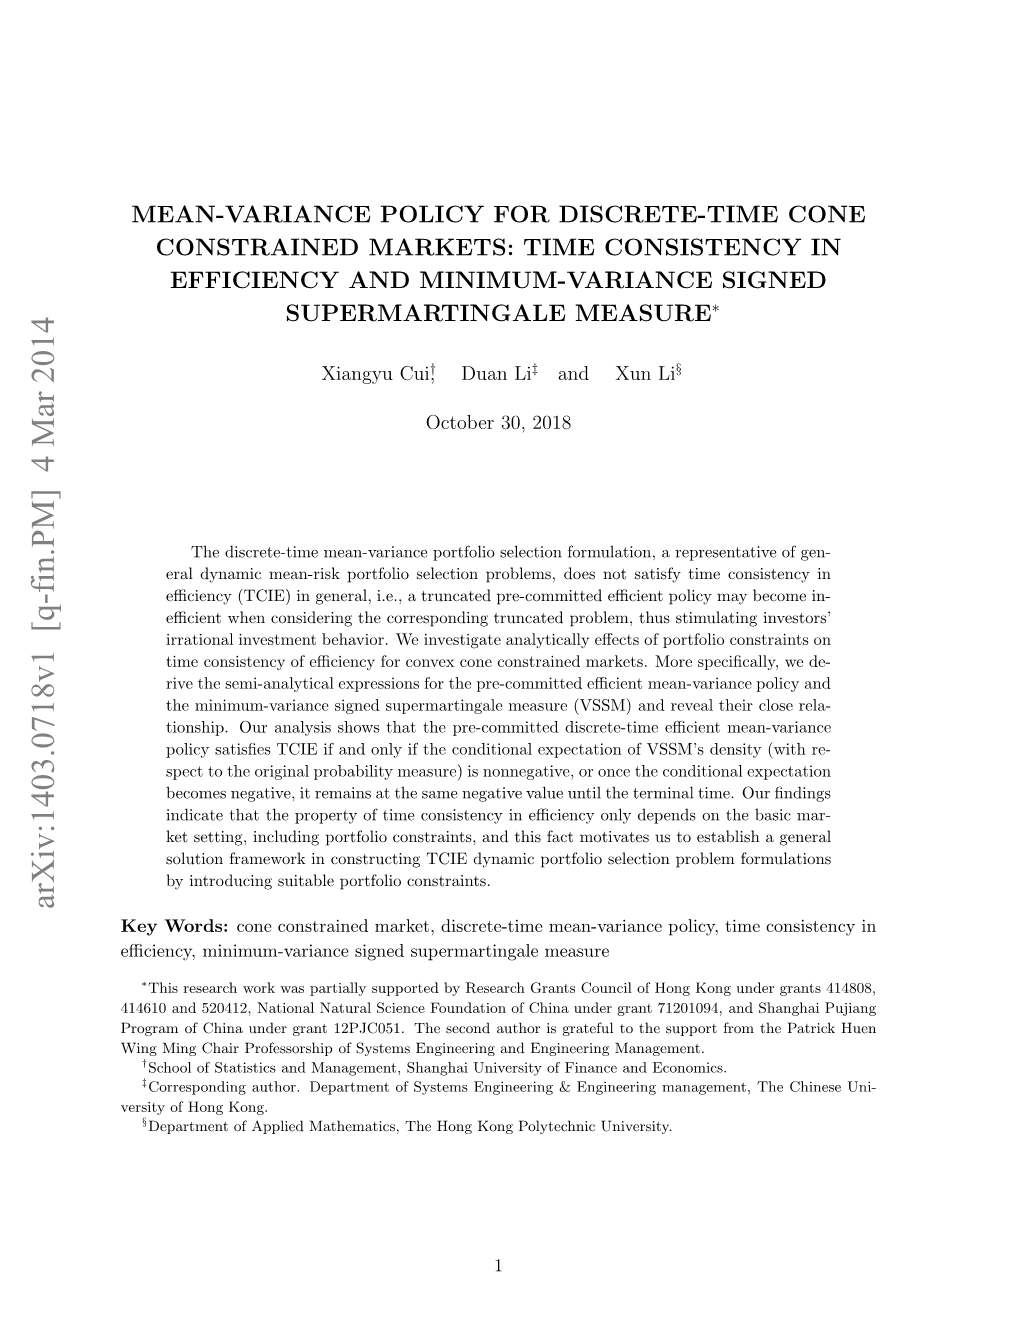 Mean-Variance Policy for Discrete-Time Cone Constrained